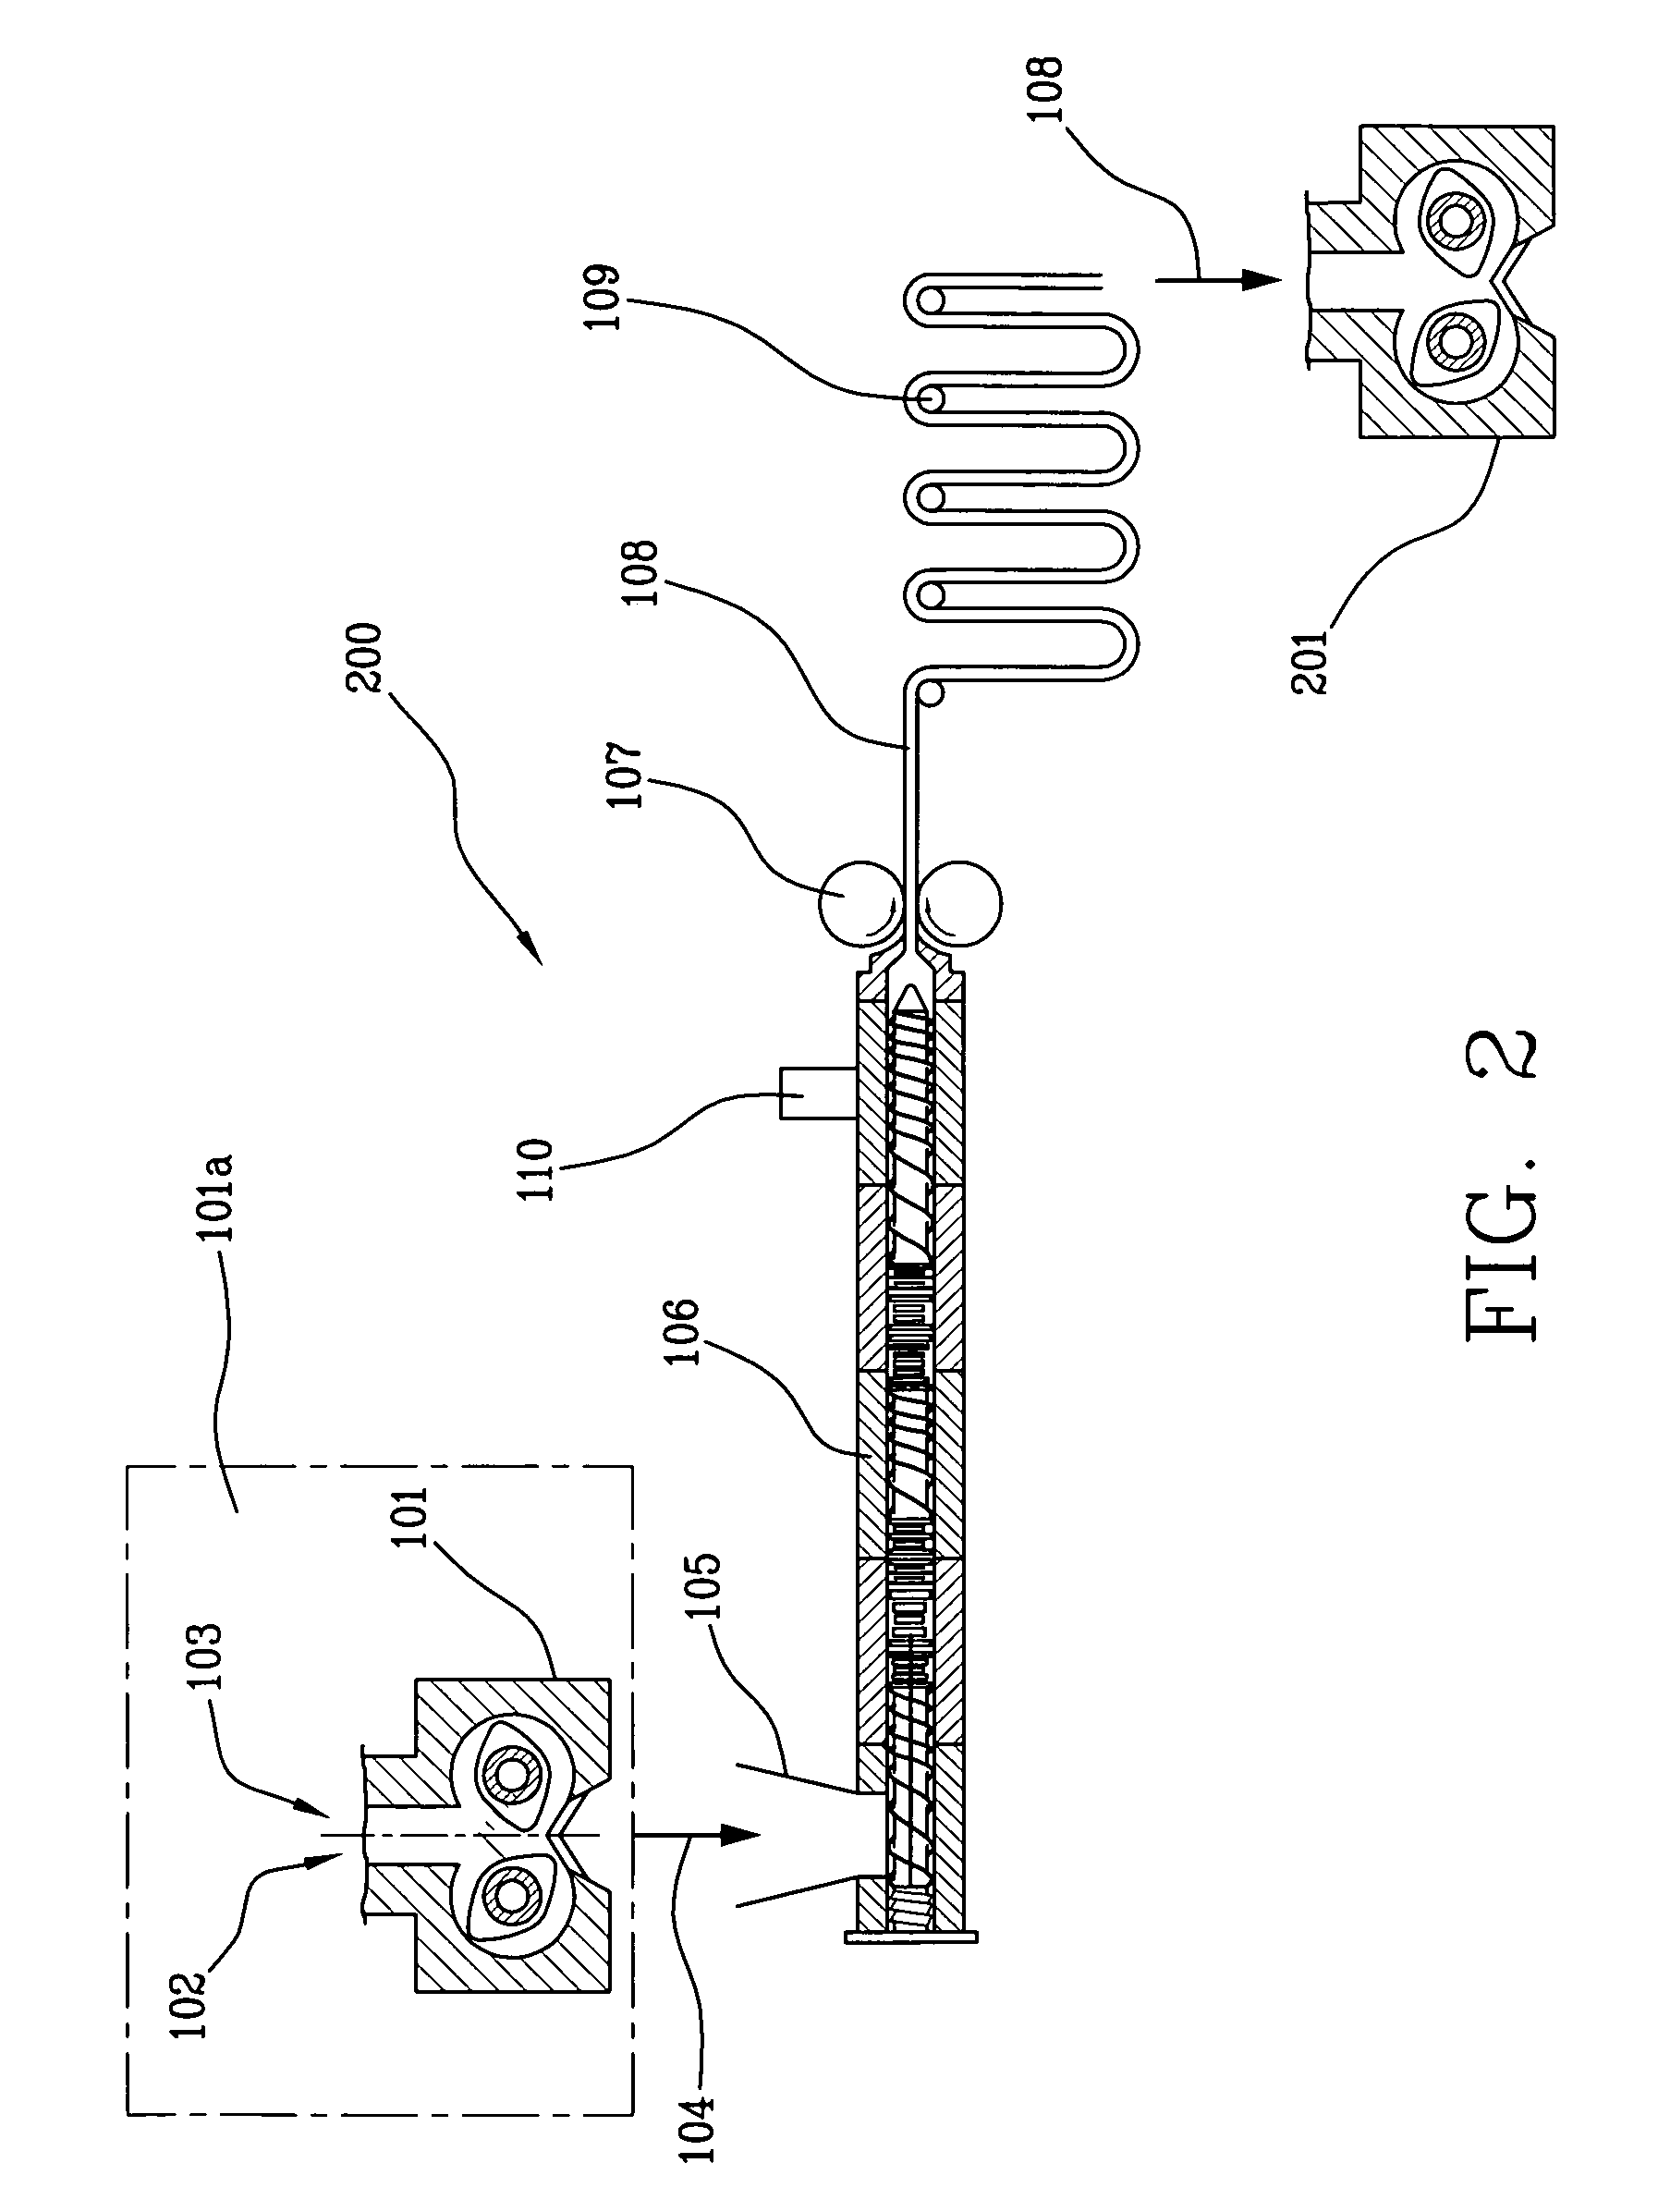 Process and plant for producing an elastomeric compound